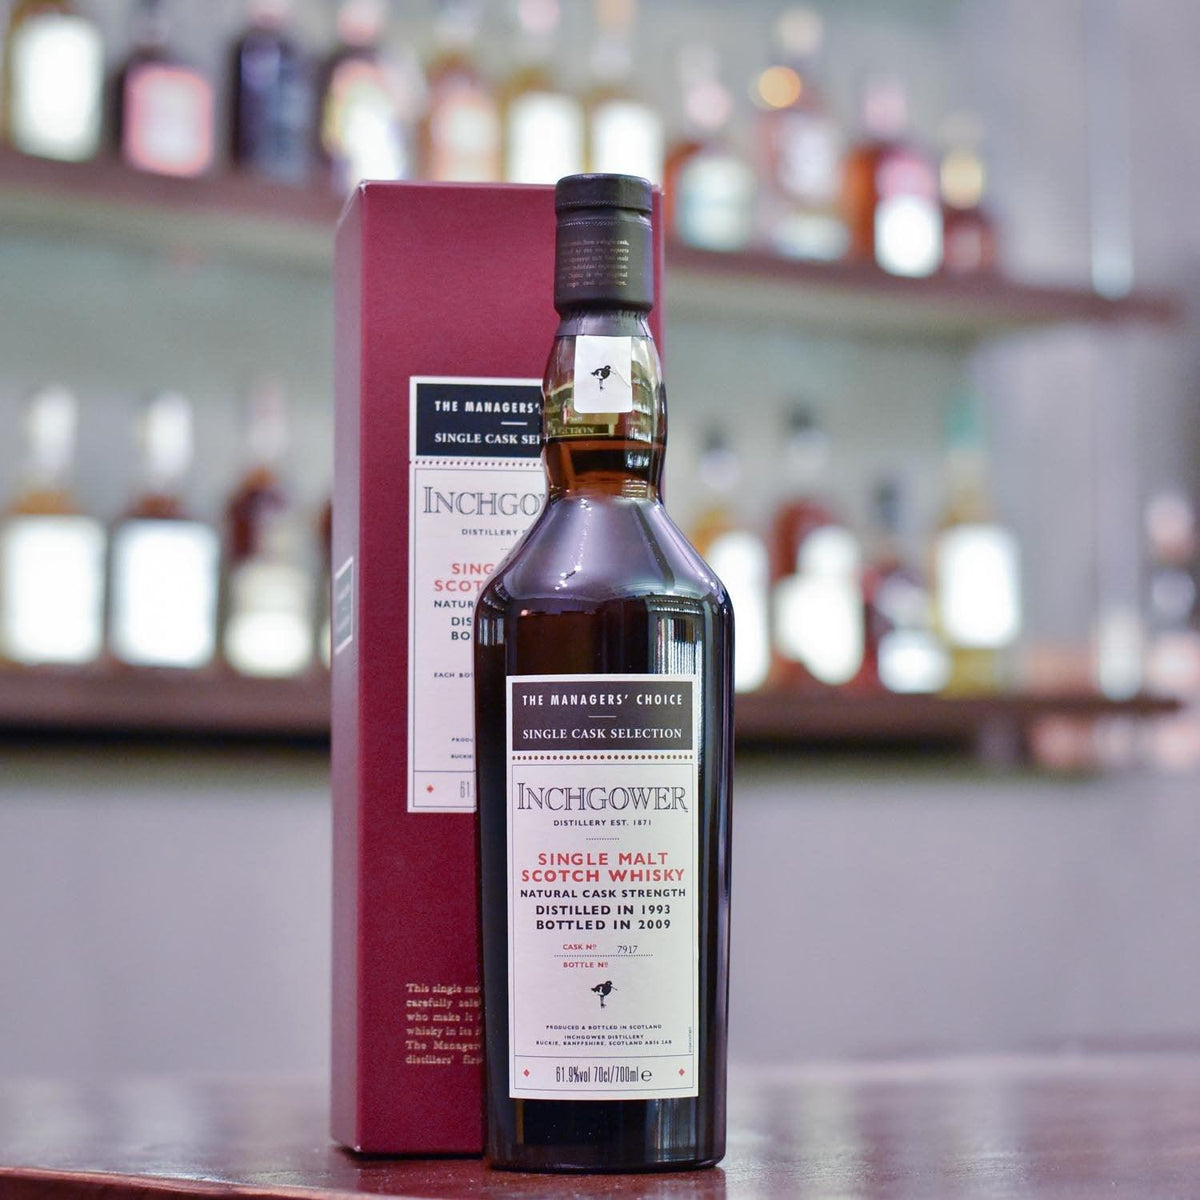 Inchgower 15 Year Old 1993 The Managers' Choice Cask 7919 - The Rare Malt